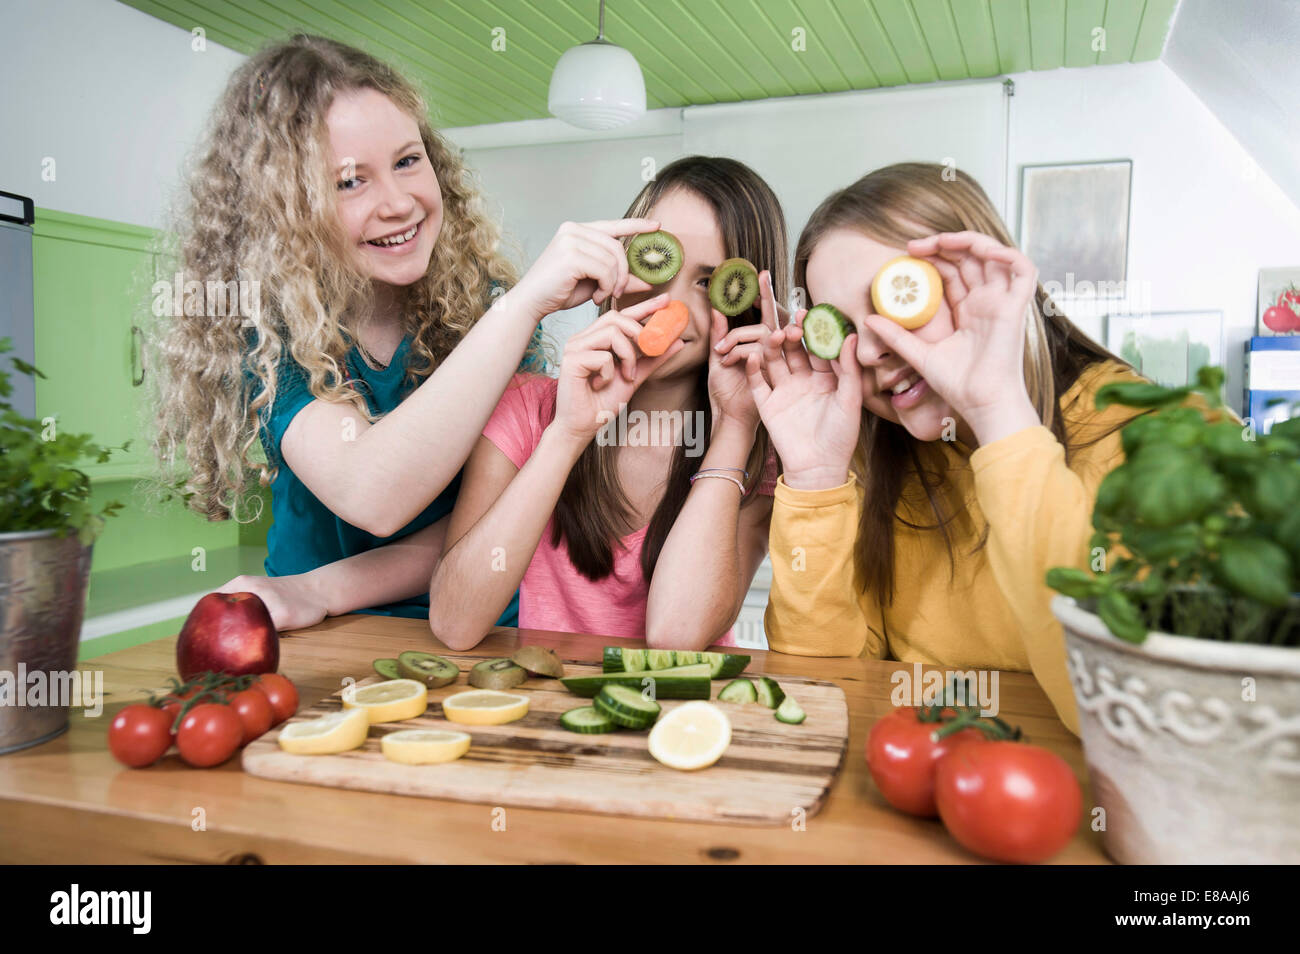 Girls in kitchen making faces with fruit Stock Photo